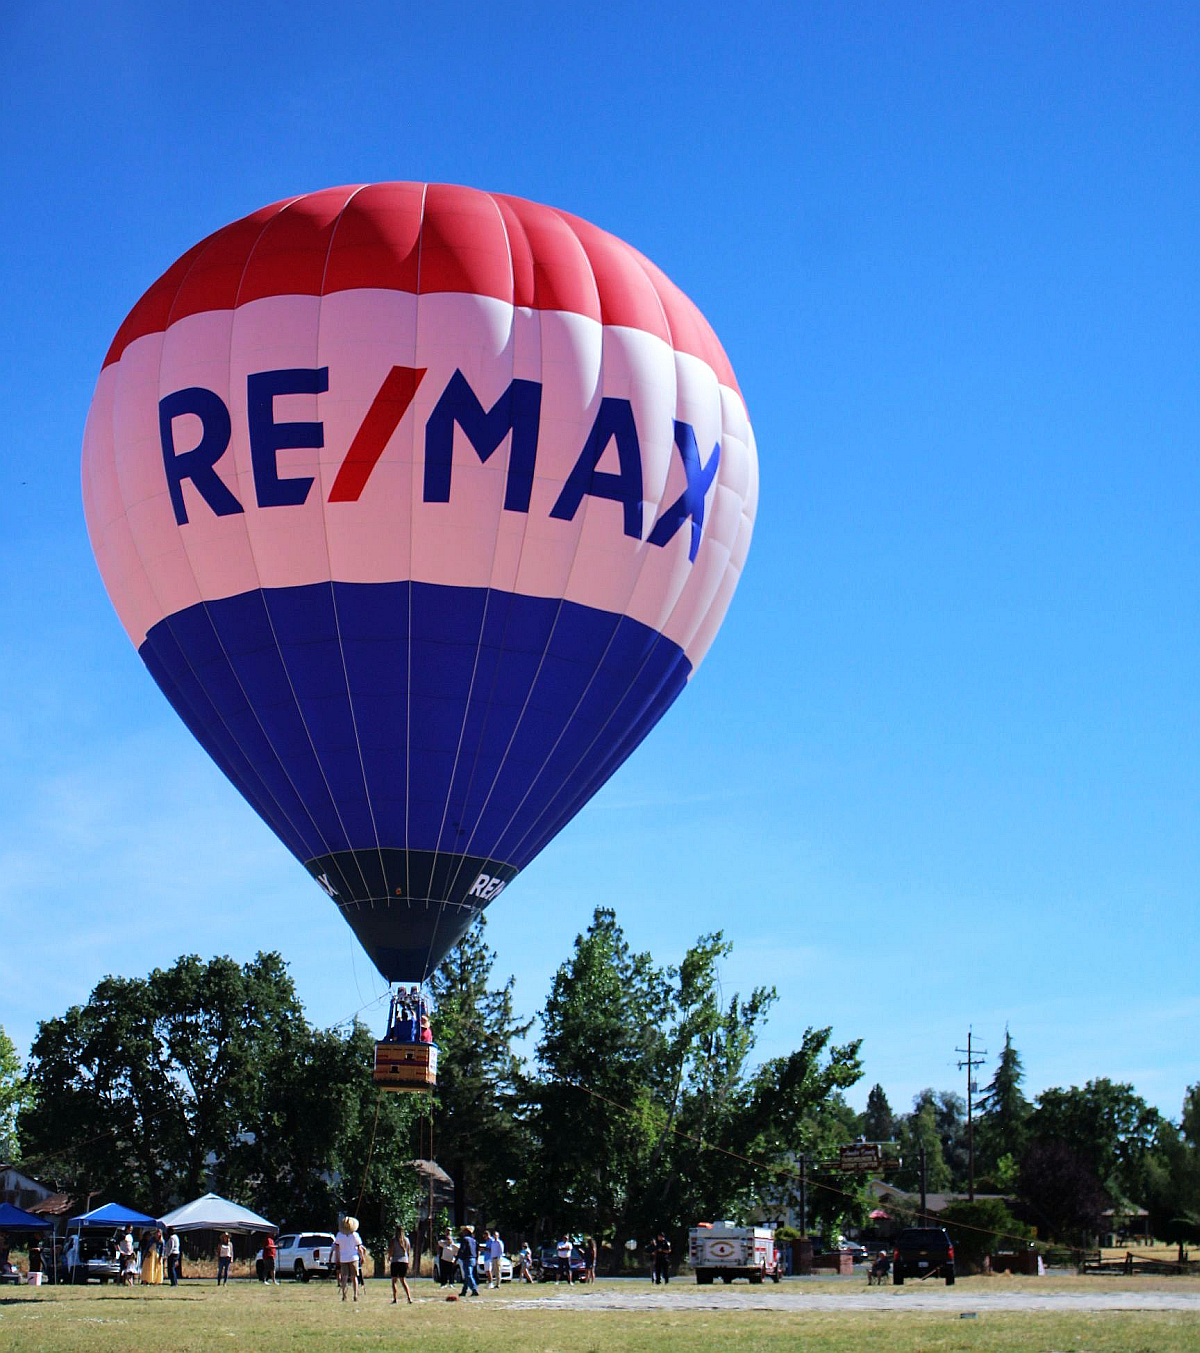 RE/MAX static glow tether - © Cheers Over California, Inc